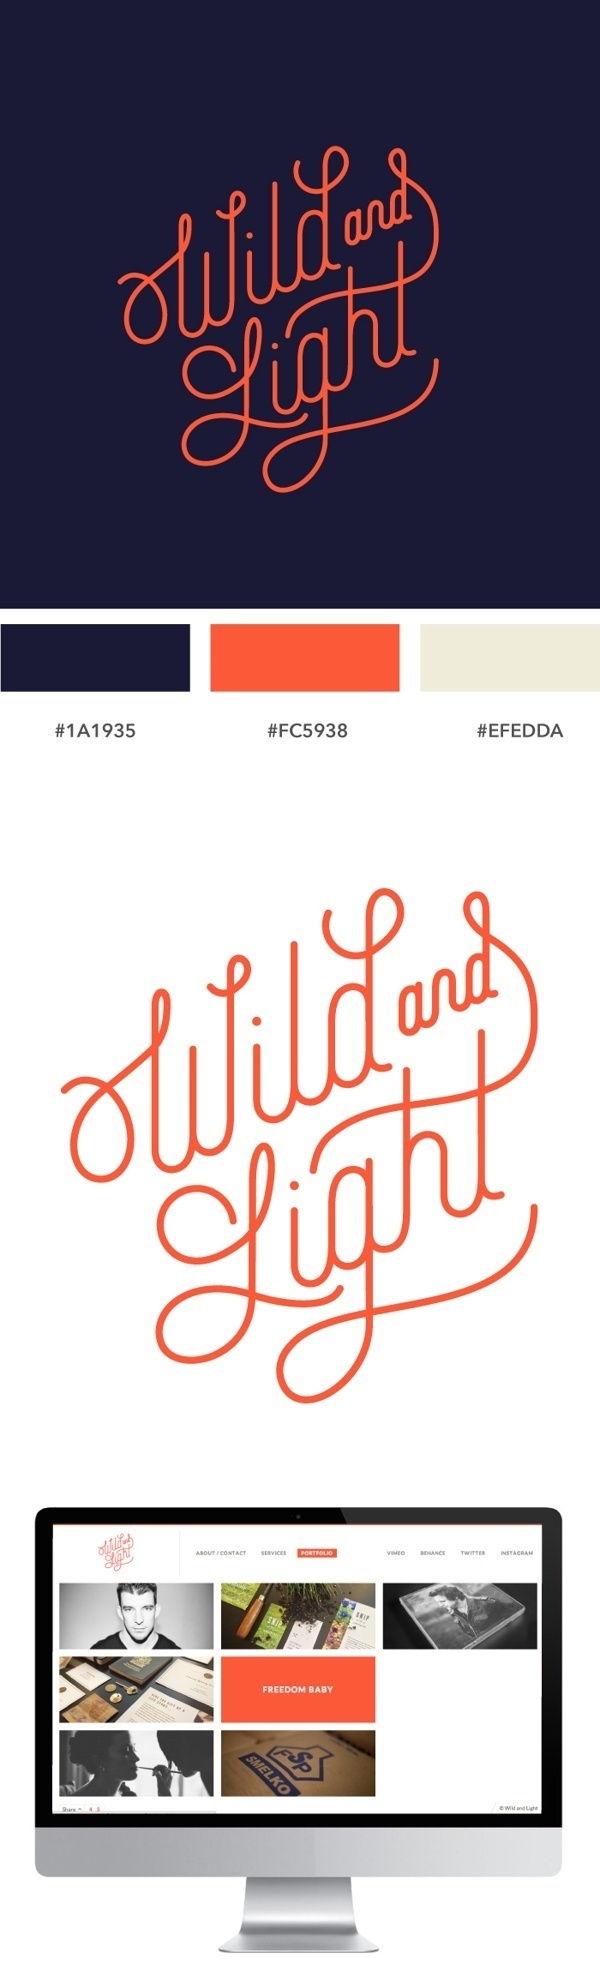 Wild and Light Branding and Web Design by ... | Branding #logotype #colors #identity #palette